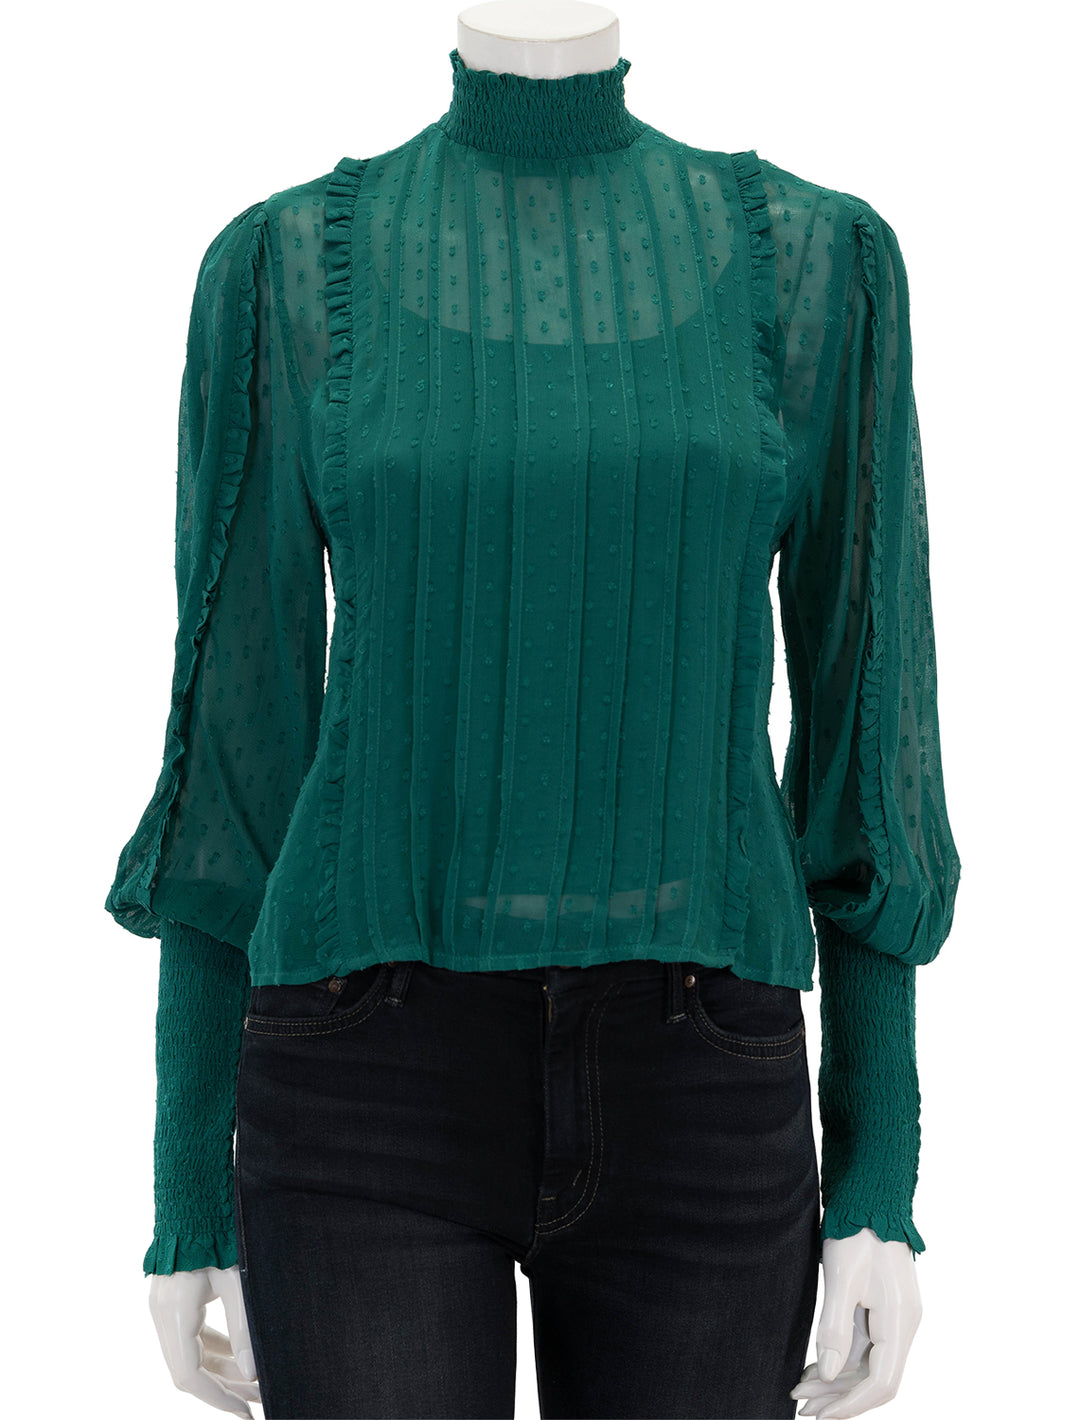 Front view of FARM Rio's emerald ruffled blouse.